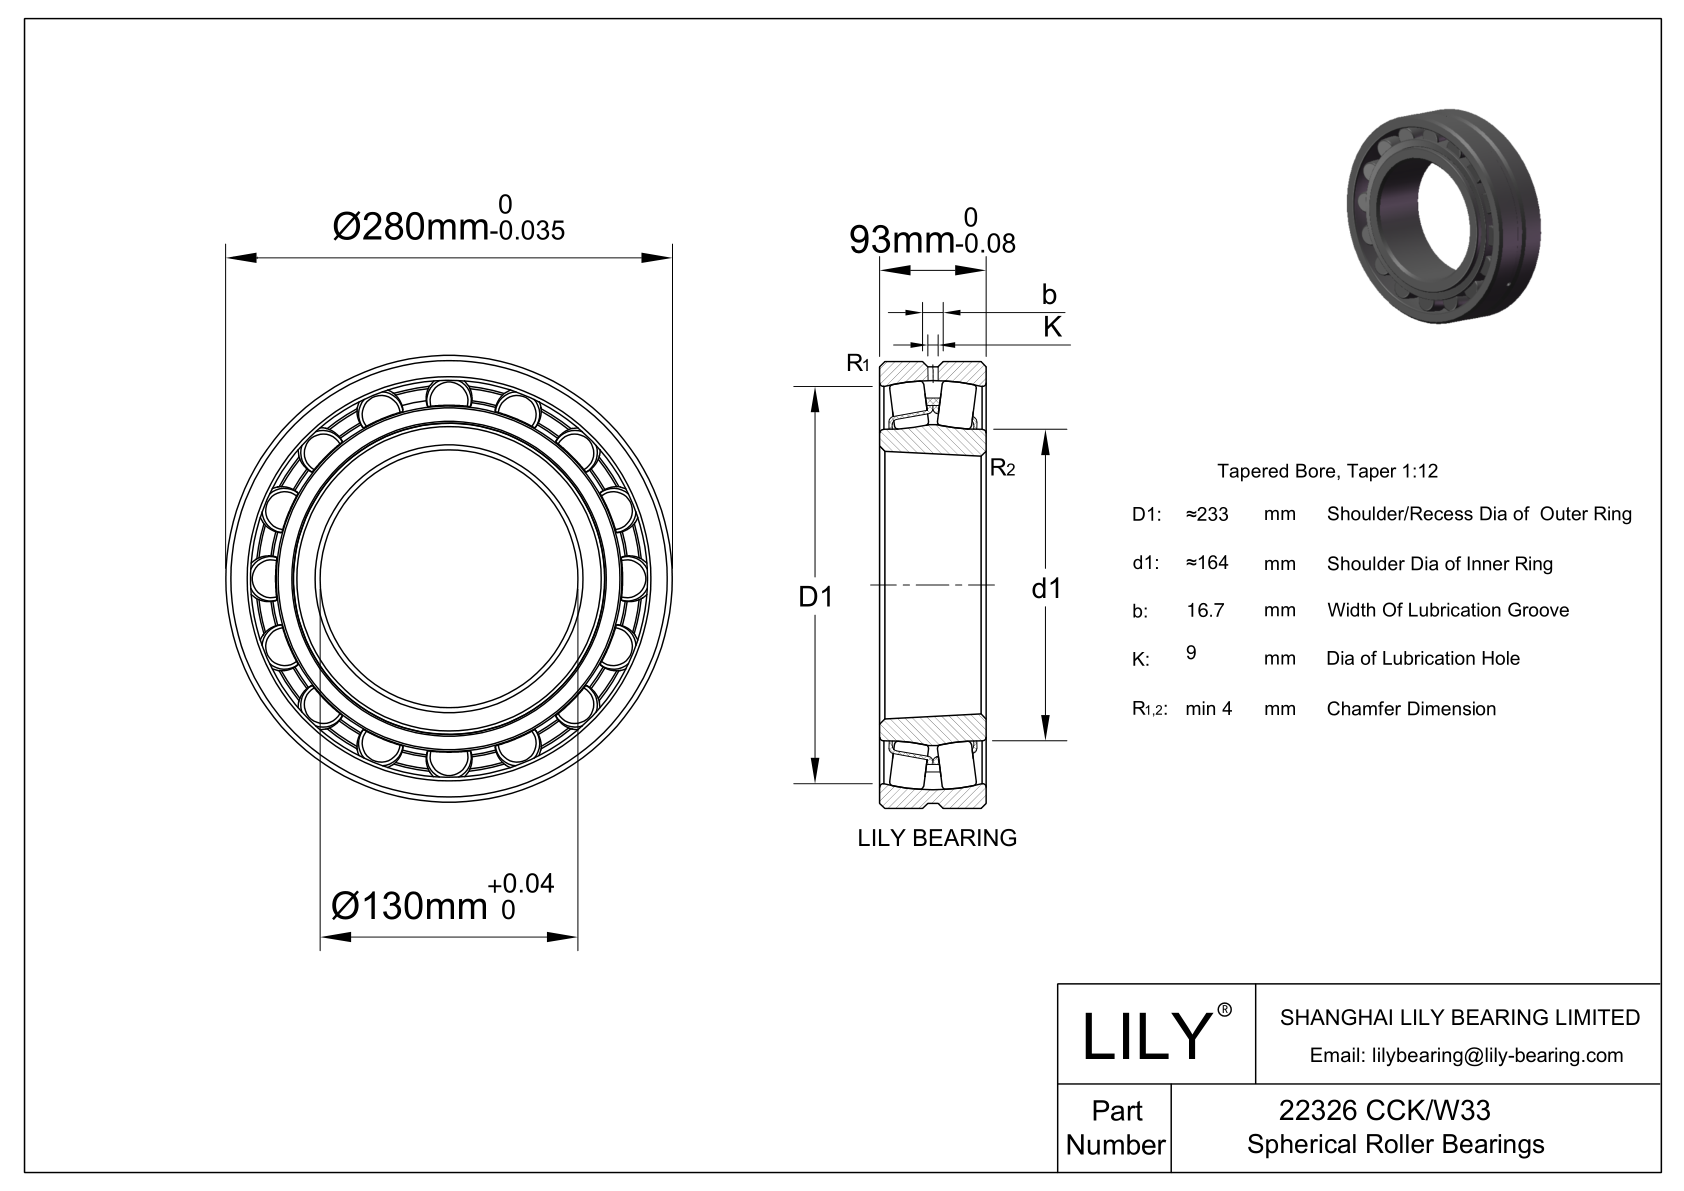 22326 CCK/W33 | Double Row Spherical Roller Bearing - SKF | Lily